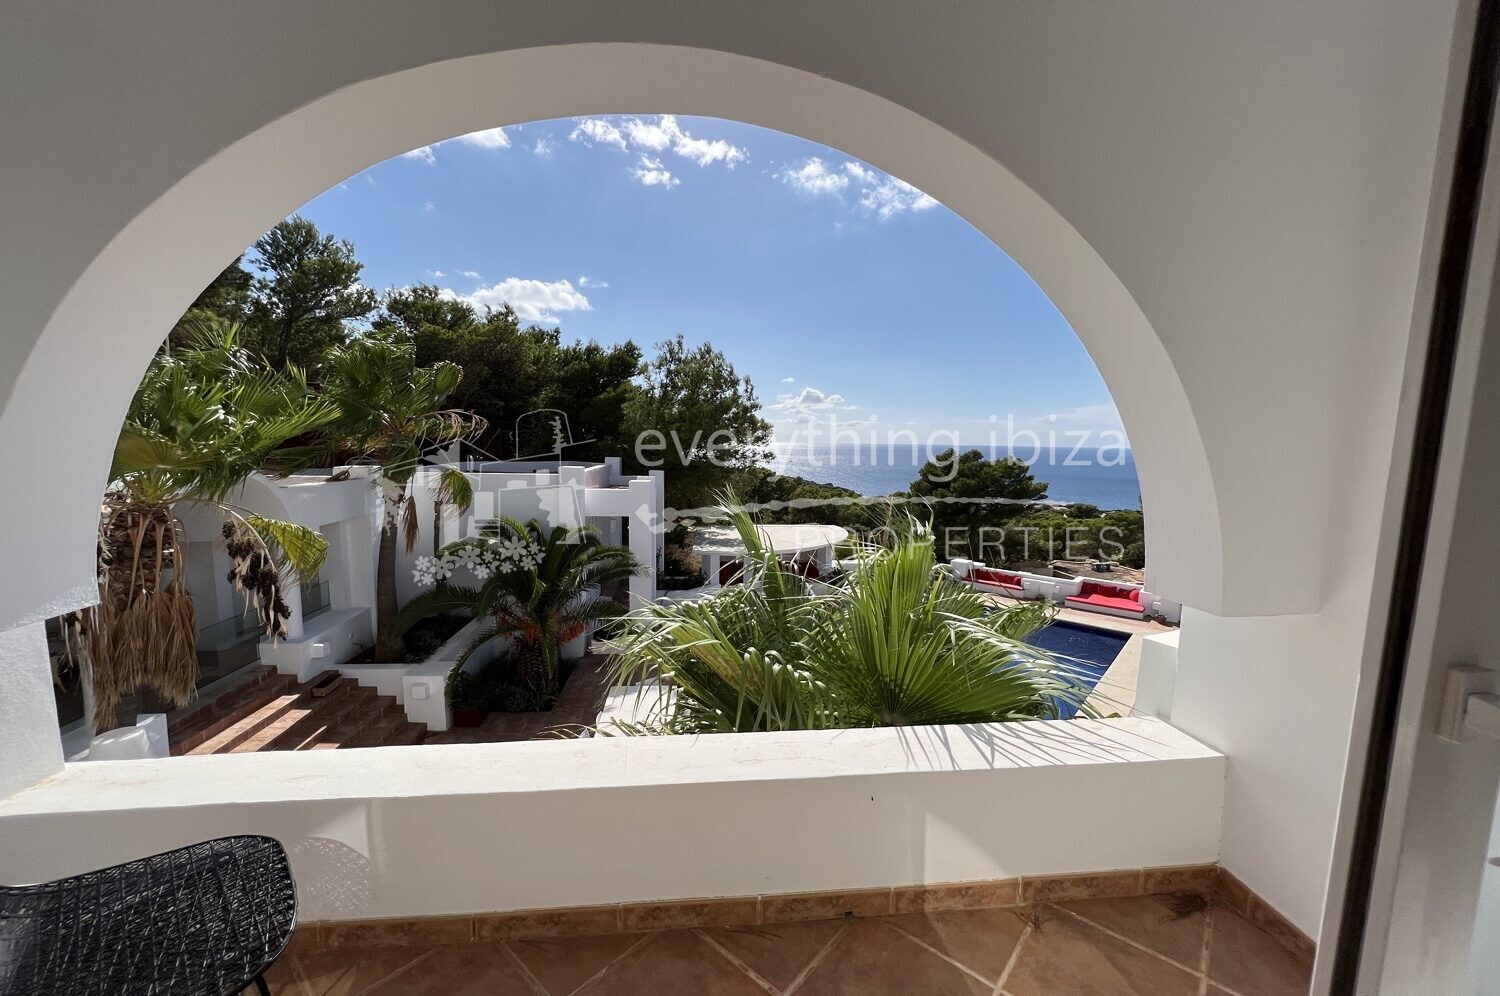 Uniquely Designed Villa with Stunning Sea & Sunset Views, ref. 1484, for sale in Ibiza by everything ibiza Properties